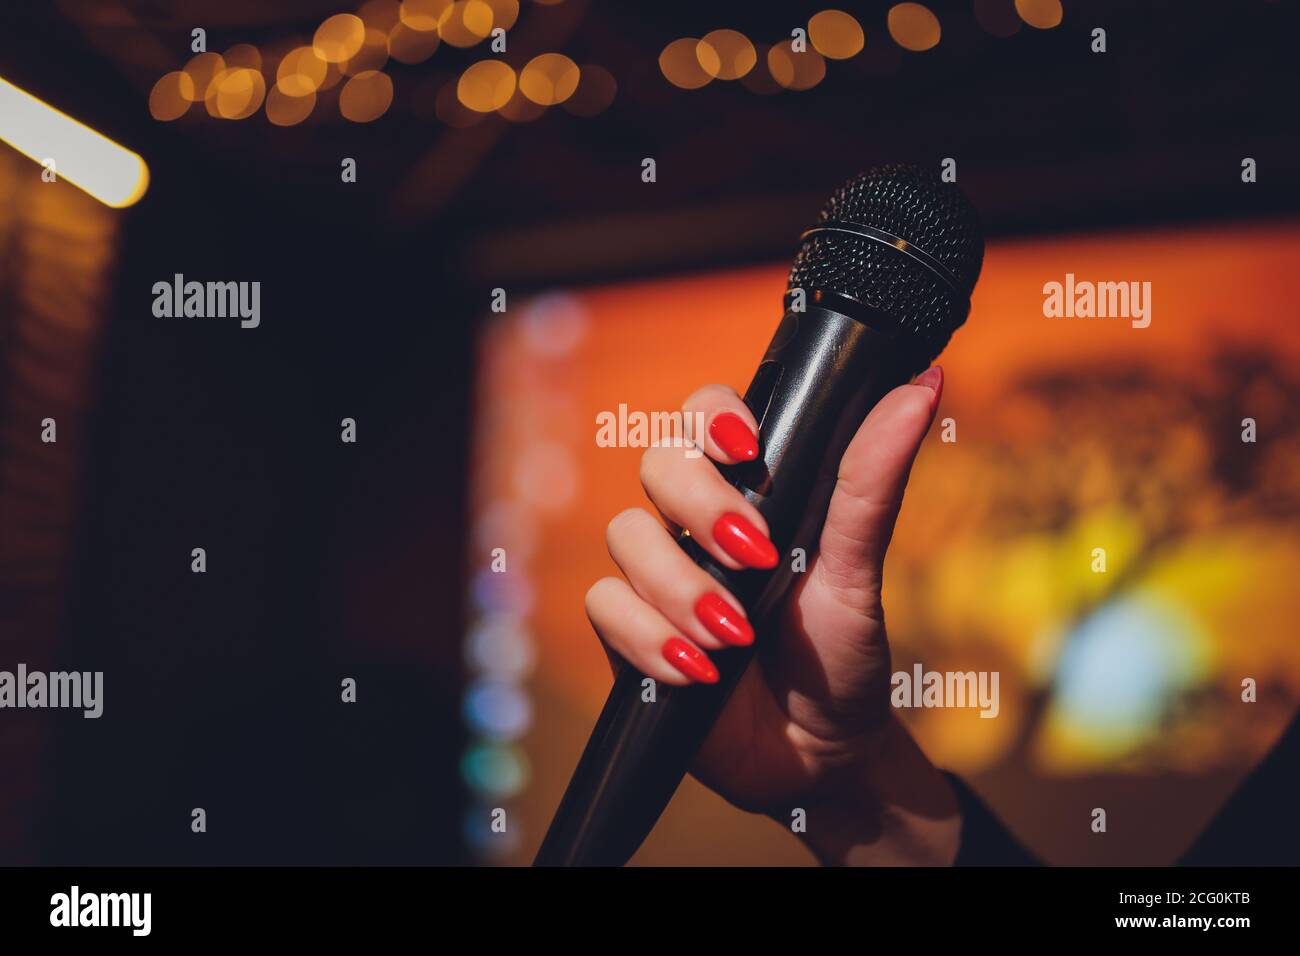 Microphone and female singer close up. Woman singing into a microphone, holding mic with hands. Stock Photo